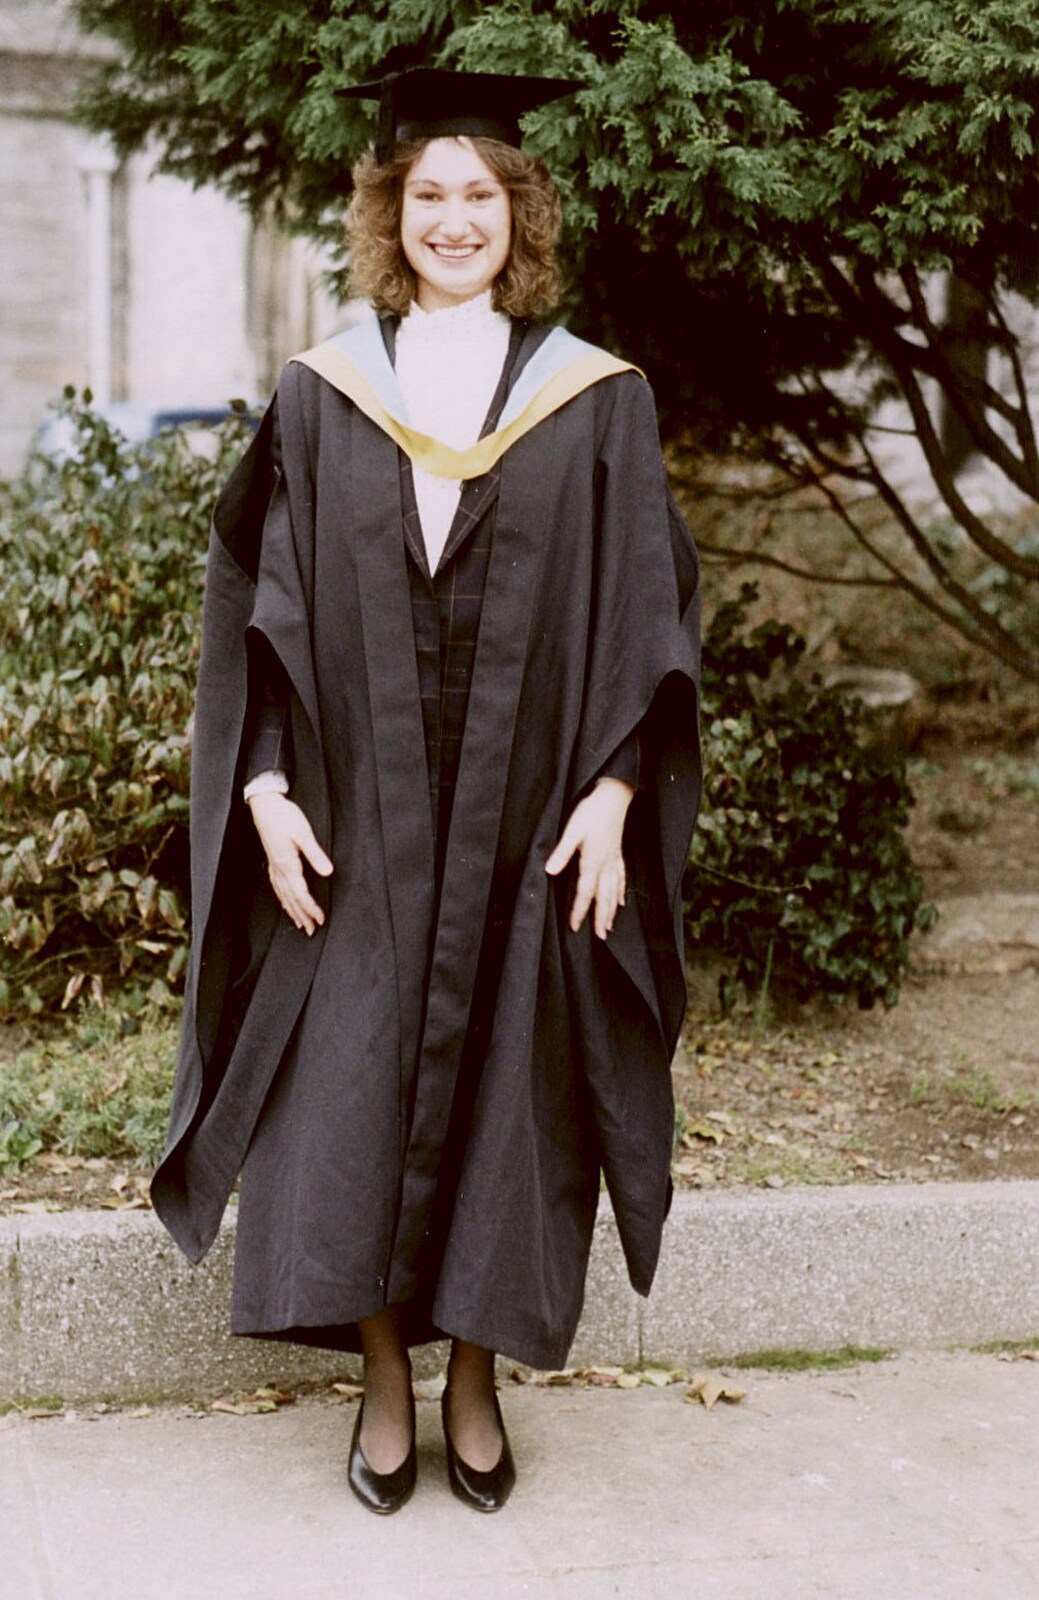 Angela Crann with mortar board from Uni: Graduation Day, The Guildhall, Plymouth, Devon - 30th September 1989